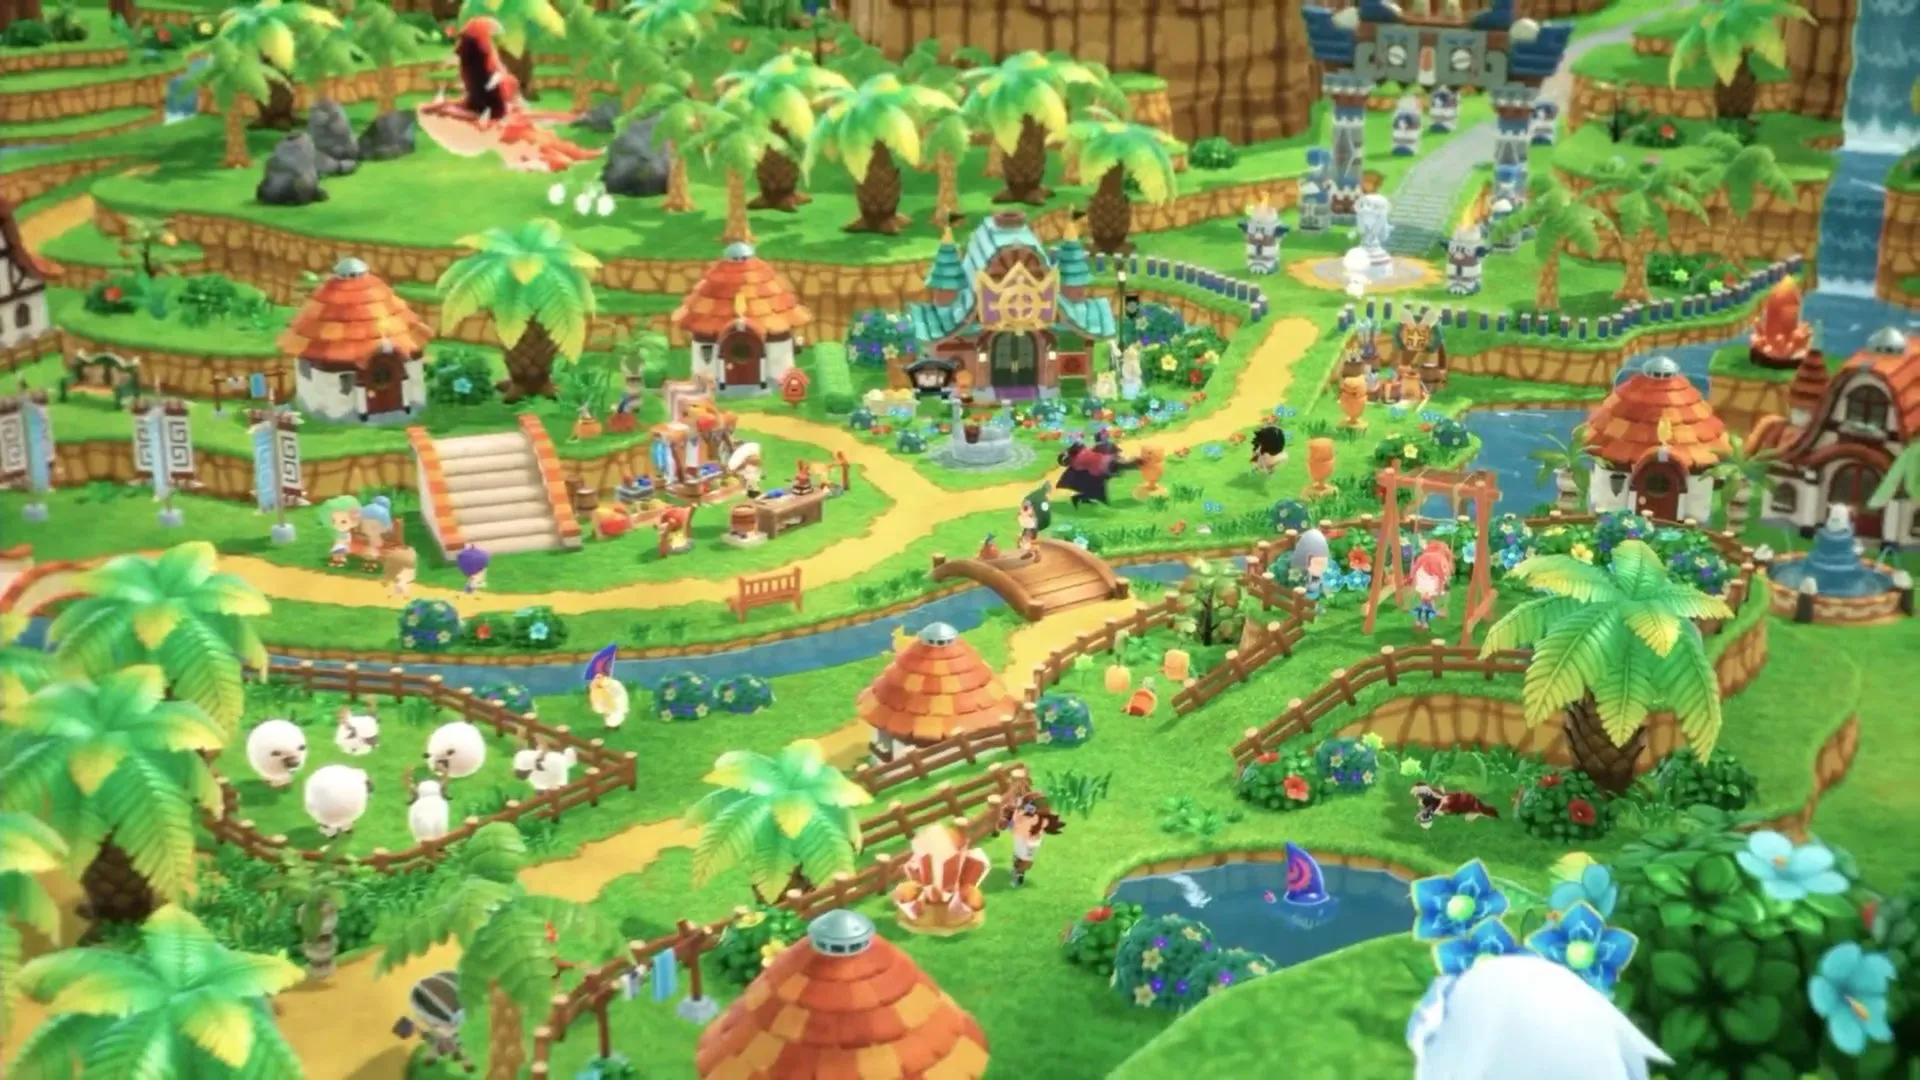 Nintendo 3DS Exclusive 'Fantasy Life' Is Getting a Sequel… On iOS